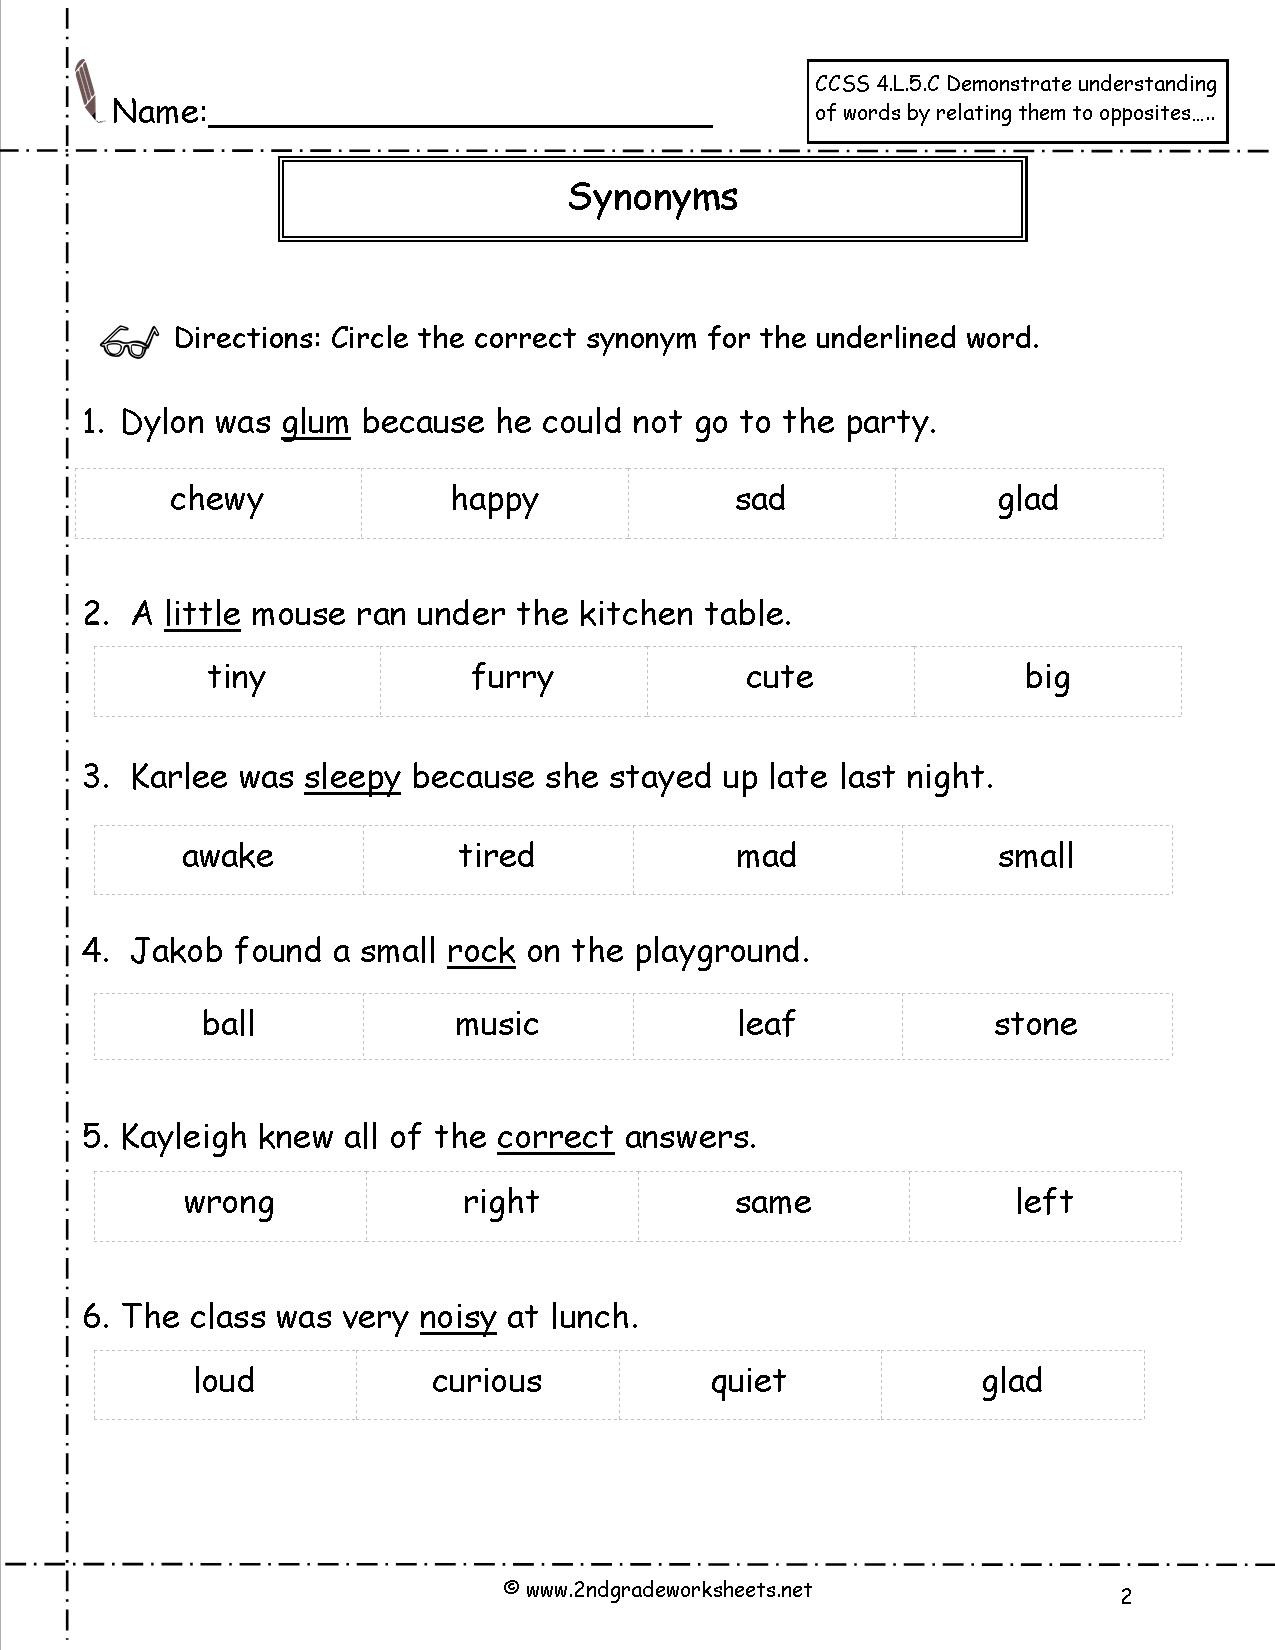 Synonyms Worksheet First Grade Synonyms and Antonyms Worksheets Antonym for Third Grade